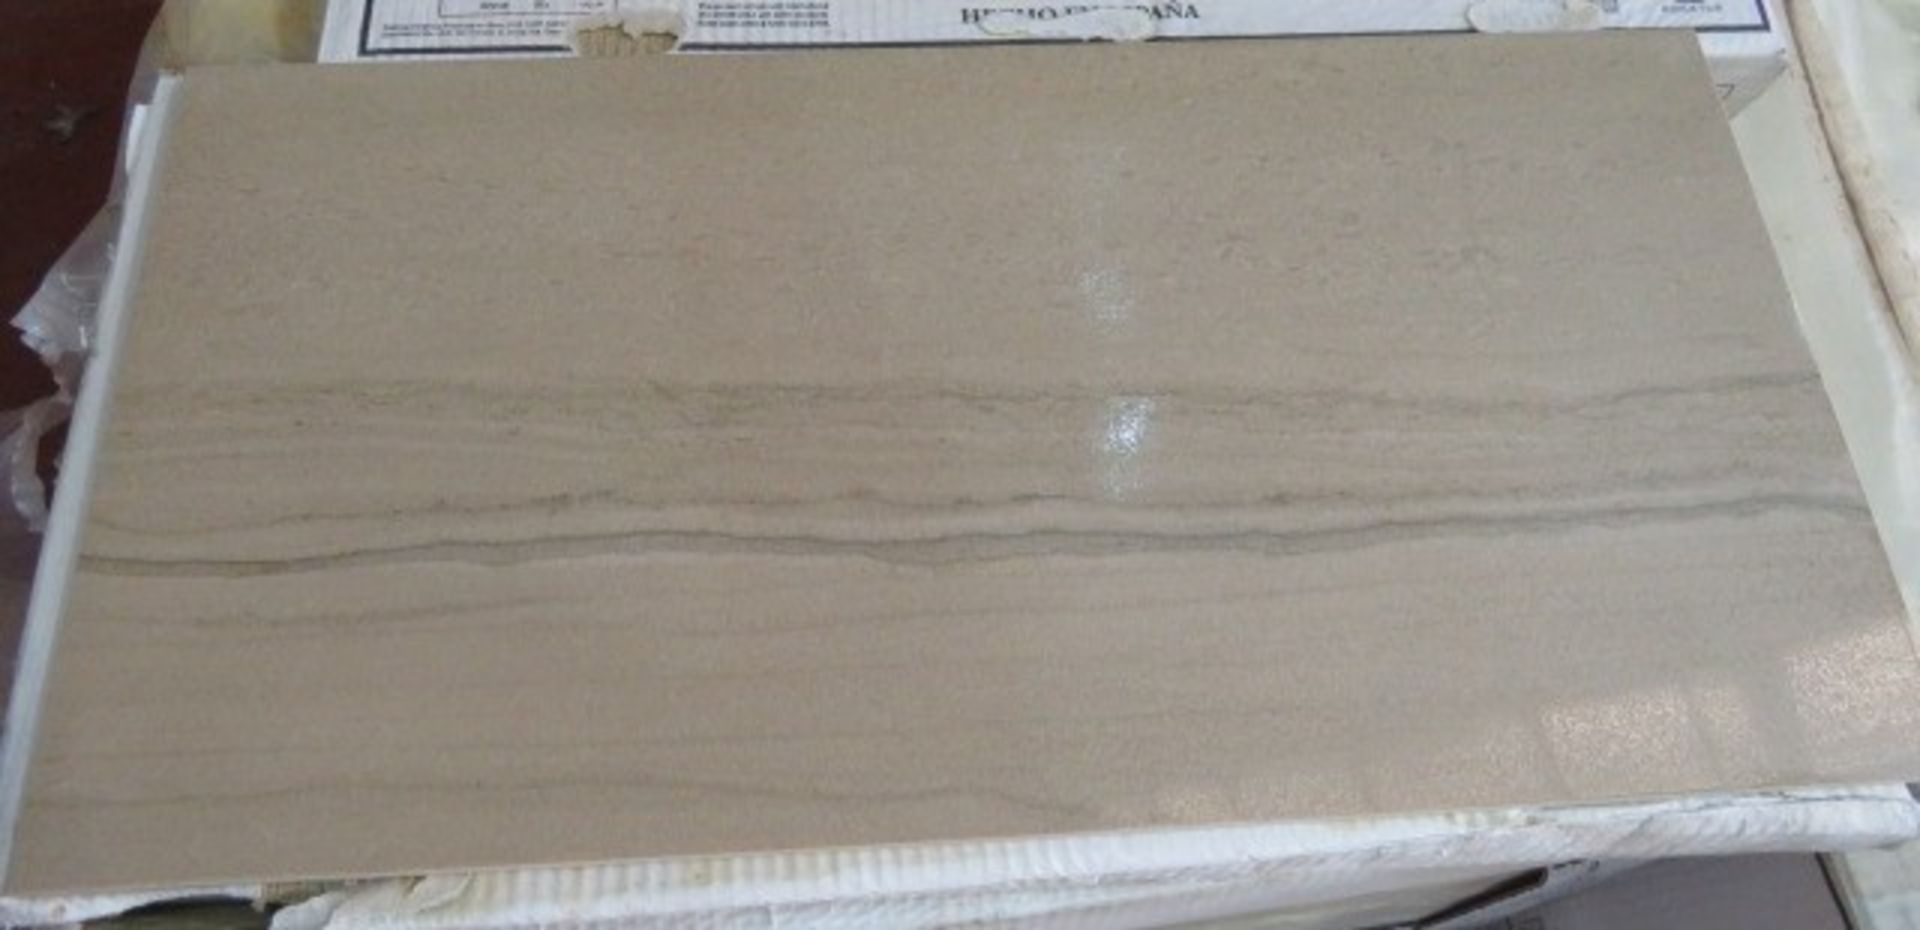 NEW 7.56m2 Bloomsbury Brook Edge Lapatto Rock Wall and Floor Tiles. 300x600mm per tile, 8.3mm ... - Image 2 of 2